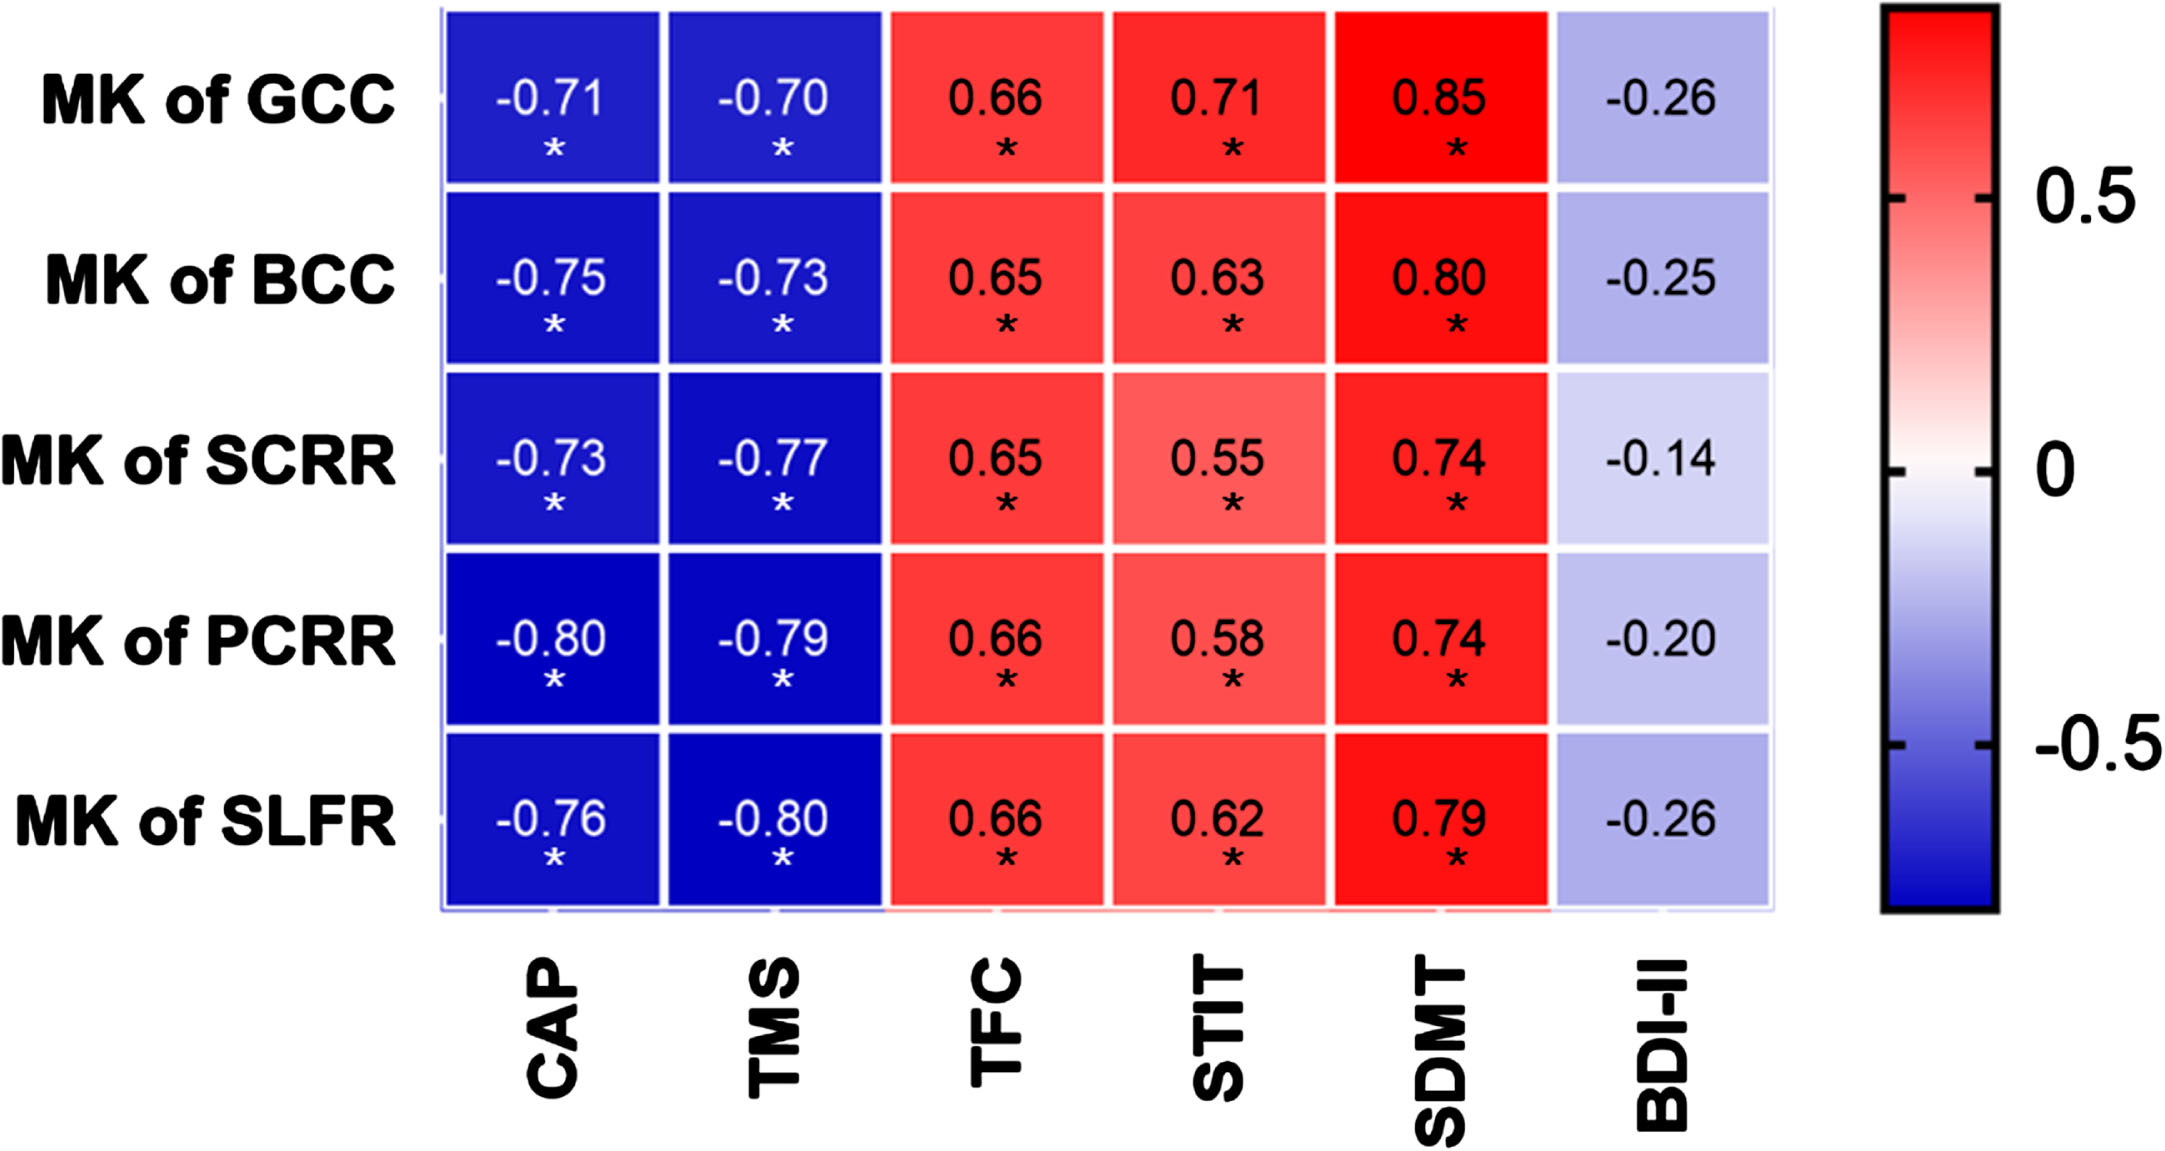 
The heat map of correlation analysis between diffusion parameters with clinical assessments. X-axis is CAP scores and clinical assessment scores. Y-axis is MK values in five key brain regions. The starts refer to correlation analysis with P values less than 0.05 after FDR correction. Red represents a positive correlation, and blue represents a negative correlation. MK, mean kurtosis; GCC, genu of corpus callosum; BCC, body of corpus callosum; SCRR, superior corona radiata R; PCRR, posterior corona radiata R; SLFR, superior longitudinal fasciculus L; TMS, Total Motor Assessment; TFC, Total Functional Capacity; STIT, Stroop Interference Test; SDMT, Symbol Dicit Modality Test; BDI-II, Beck Depression Inventory II.